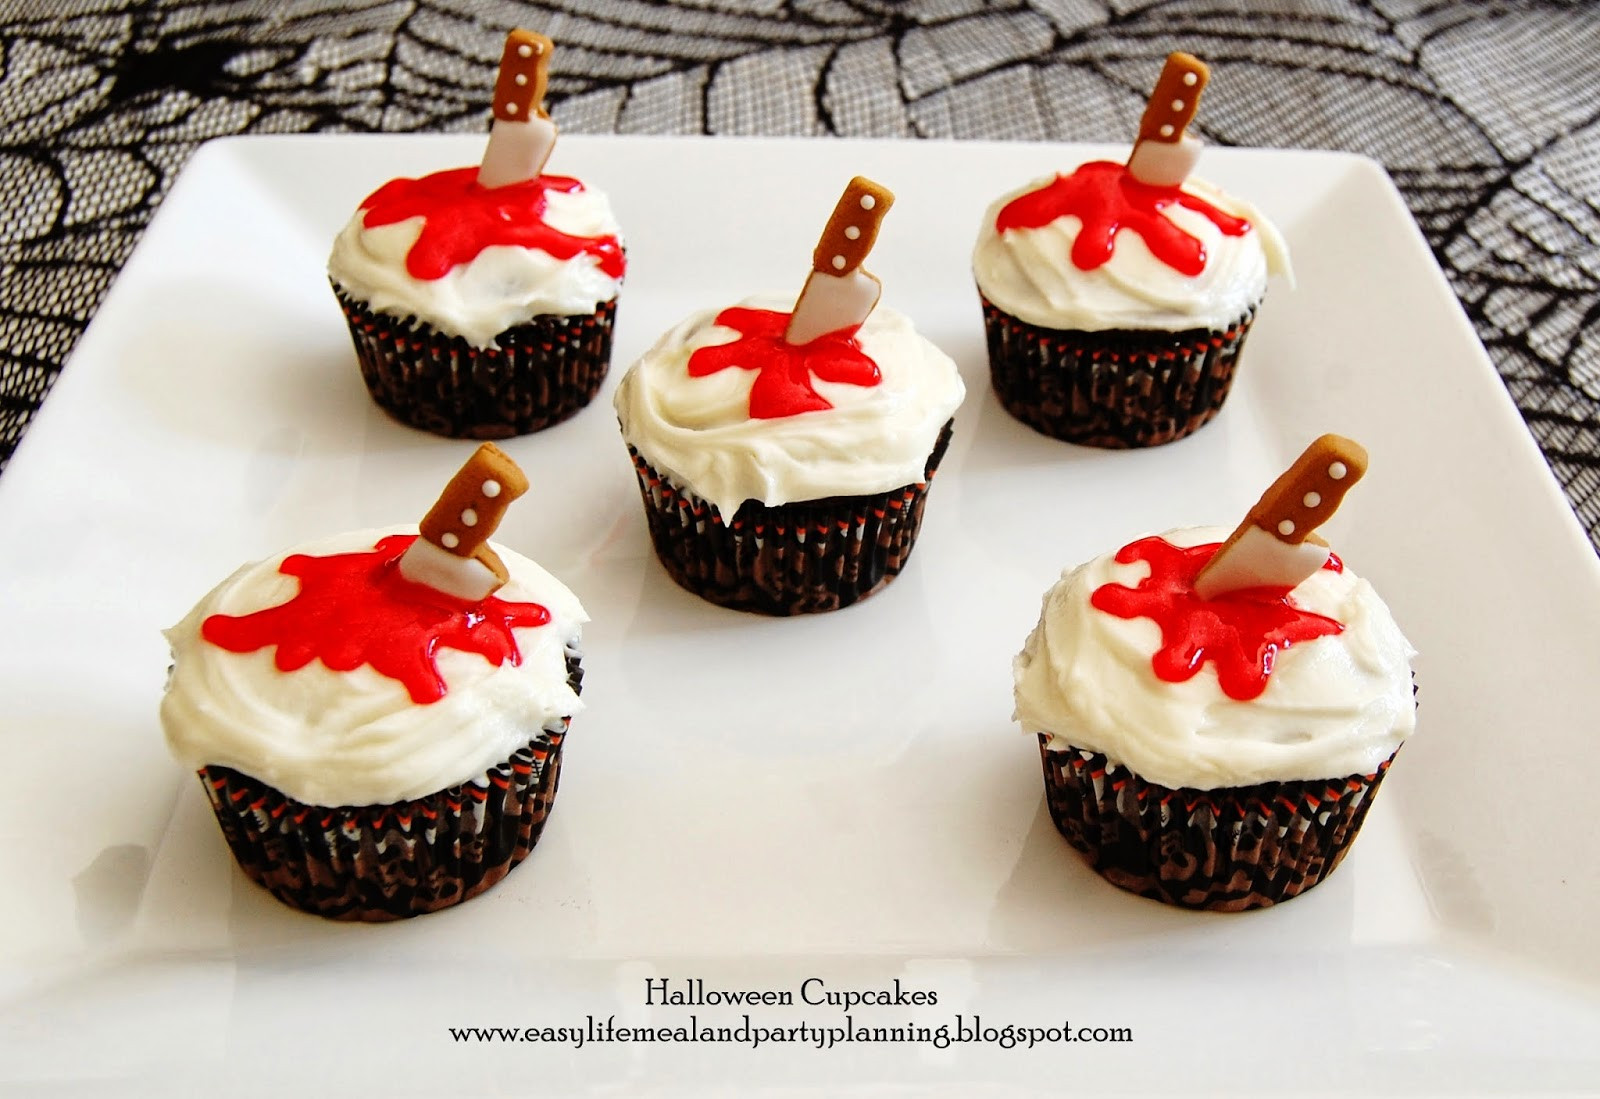 Halloween Cupcakes Decorations
 Easy Life Meal and Party Planning October 2013